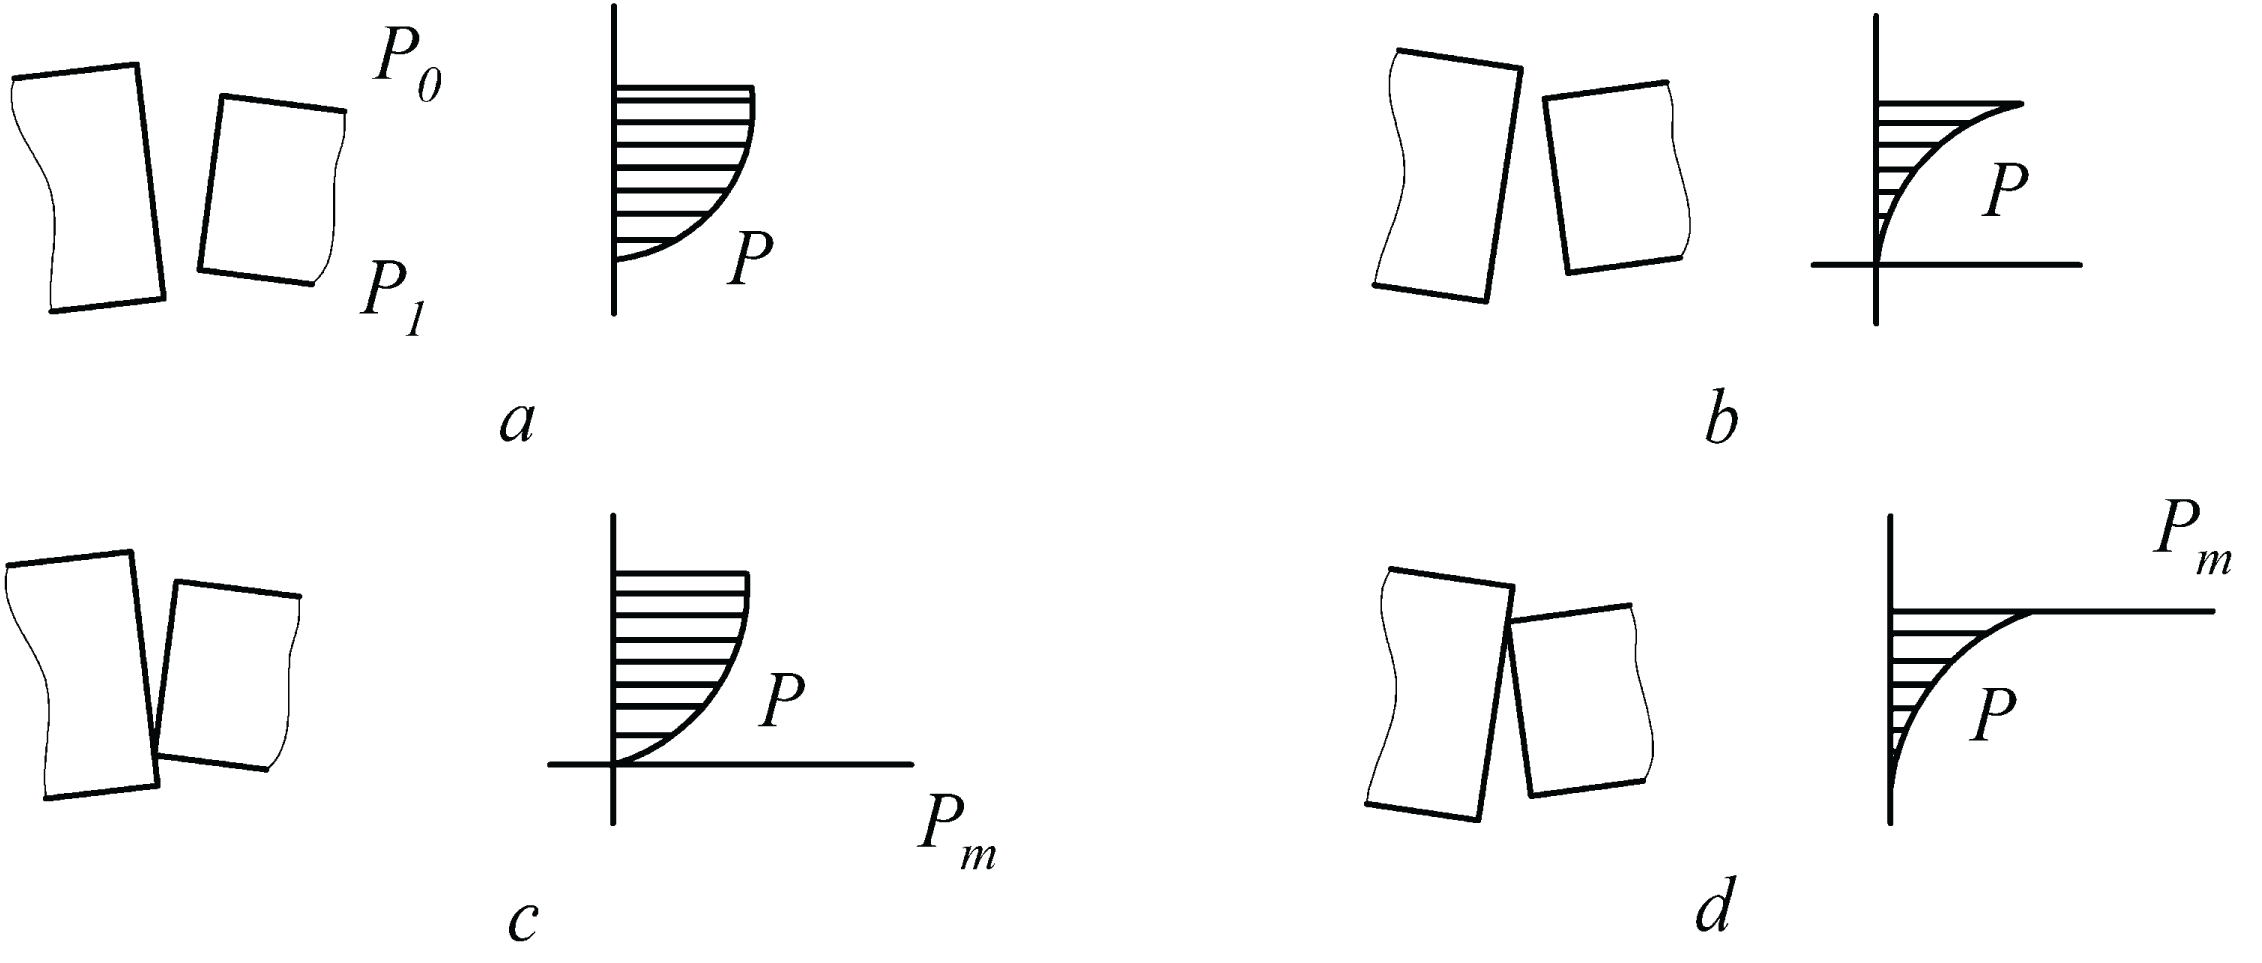 The location of the sealing surfaces of the mechanical seal rings and the diagram of the pressure of the sealed liquid: <em>a</em> - Confusor open joint, <em>b</em> - Diffuser open joint, <em>c</em> - Confusor joint with contact, <em>d</em> - Diffuser joint with contact.